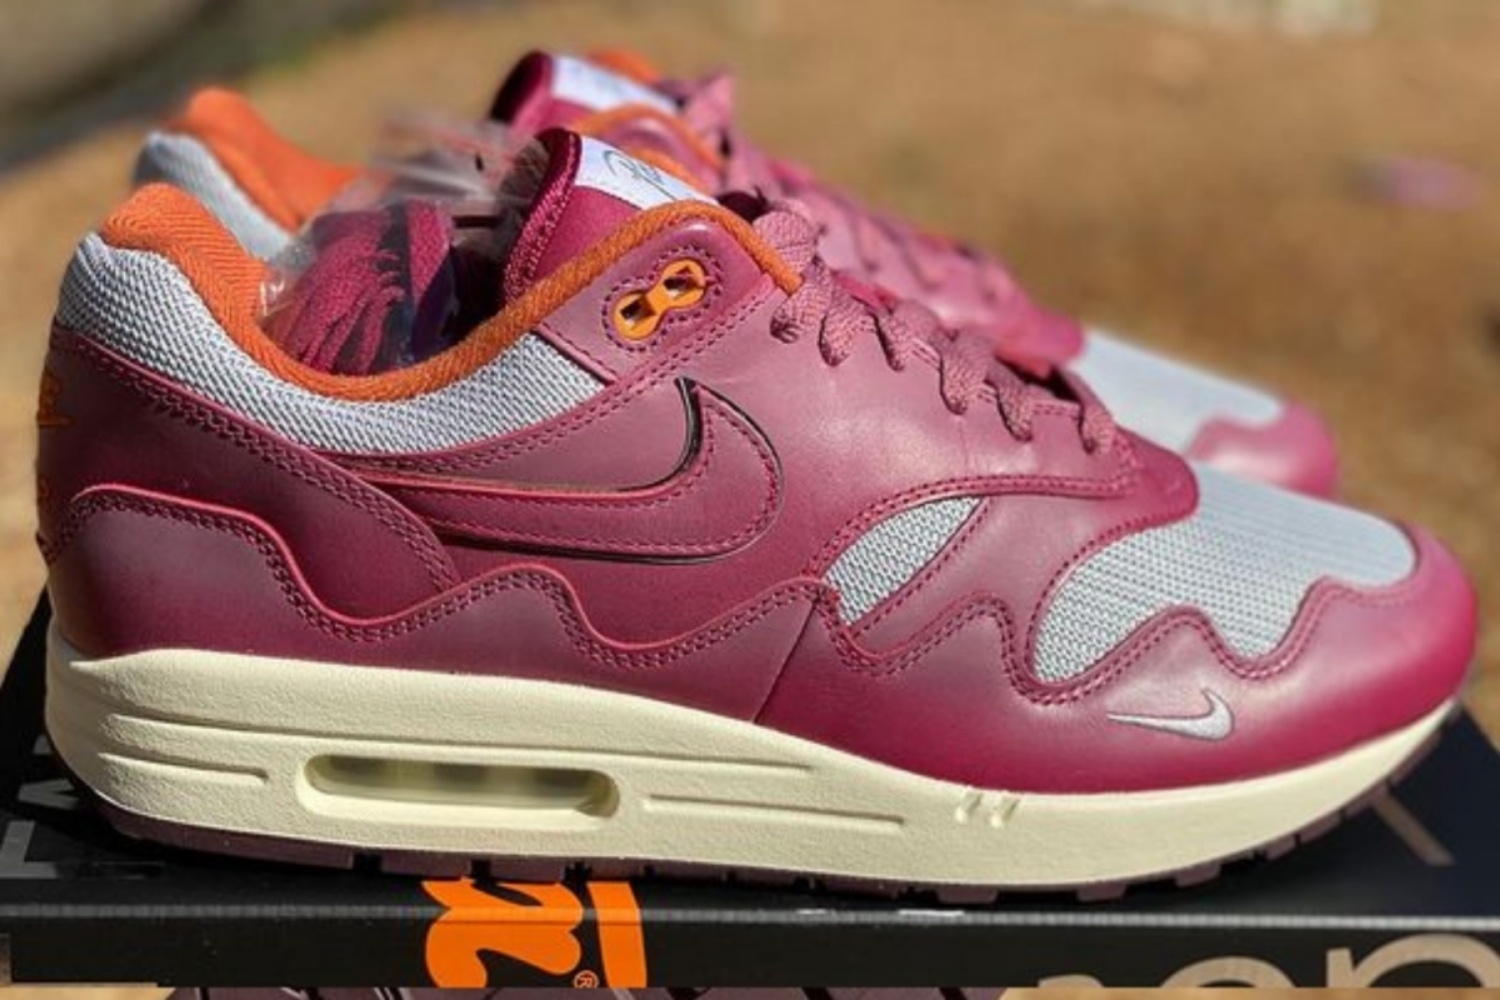 Check out the Patta x The Wave Air Max 1 'Maroon'